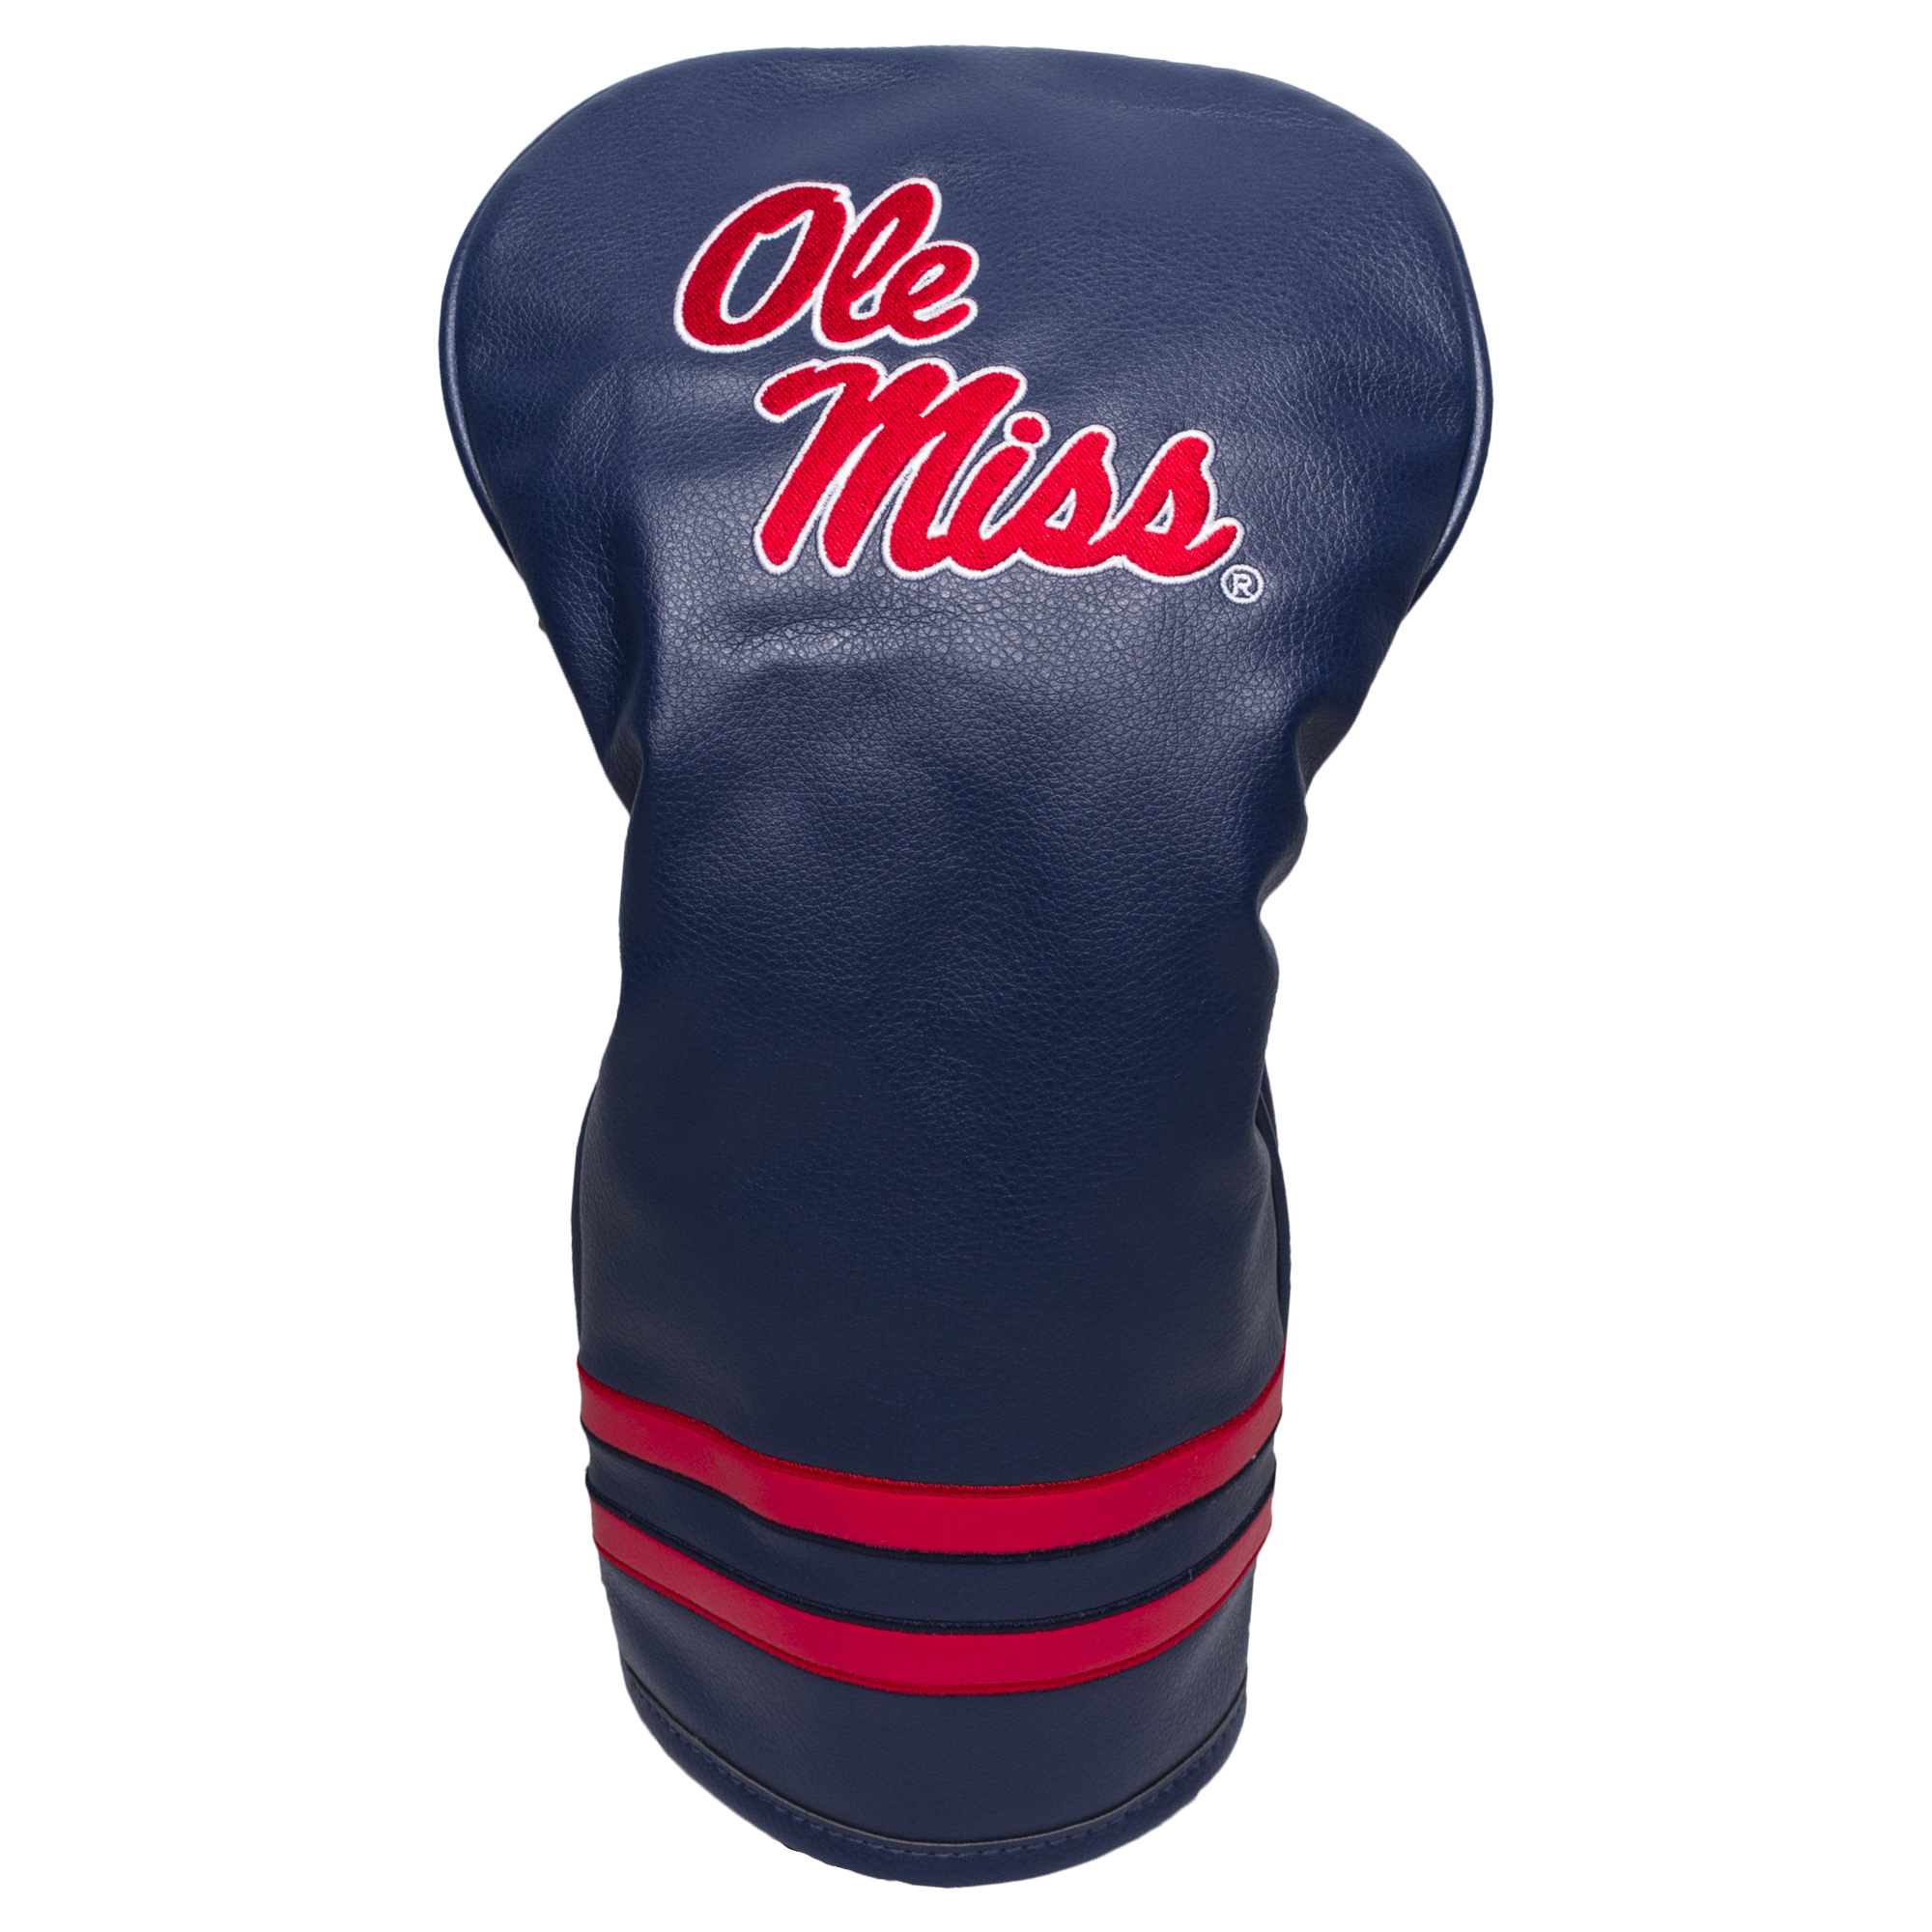 Ole Miss Vintage Driver Headcover